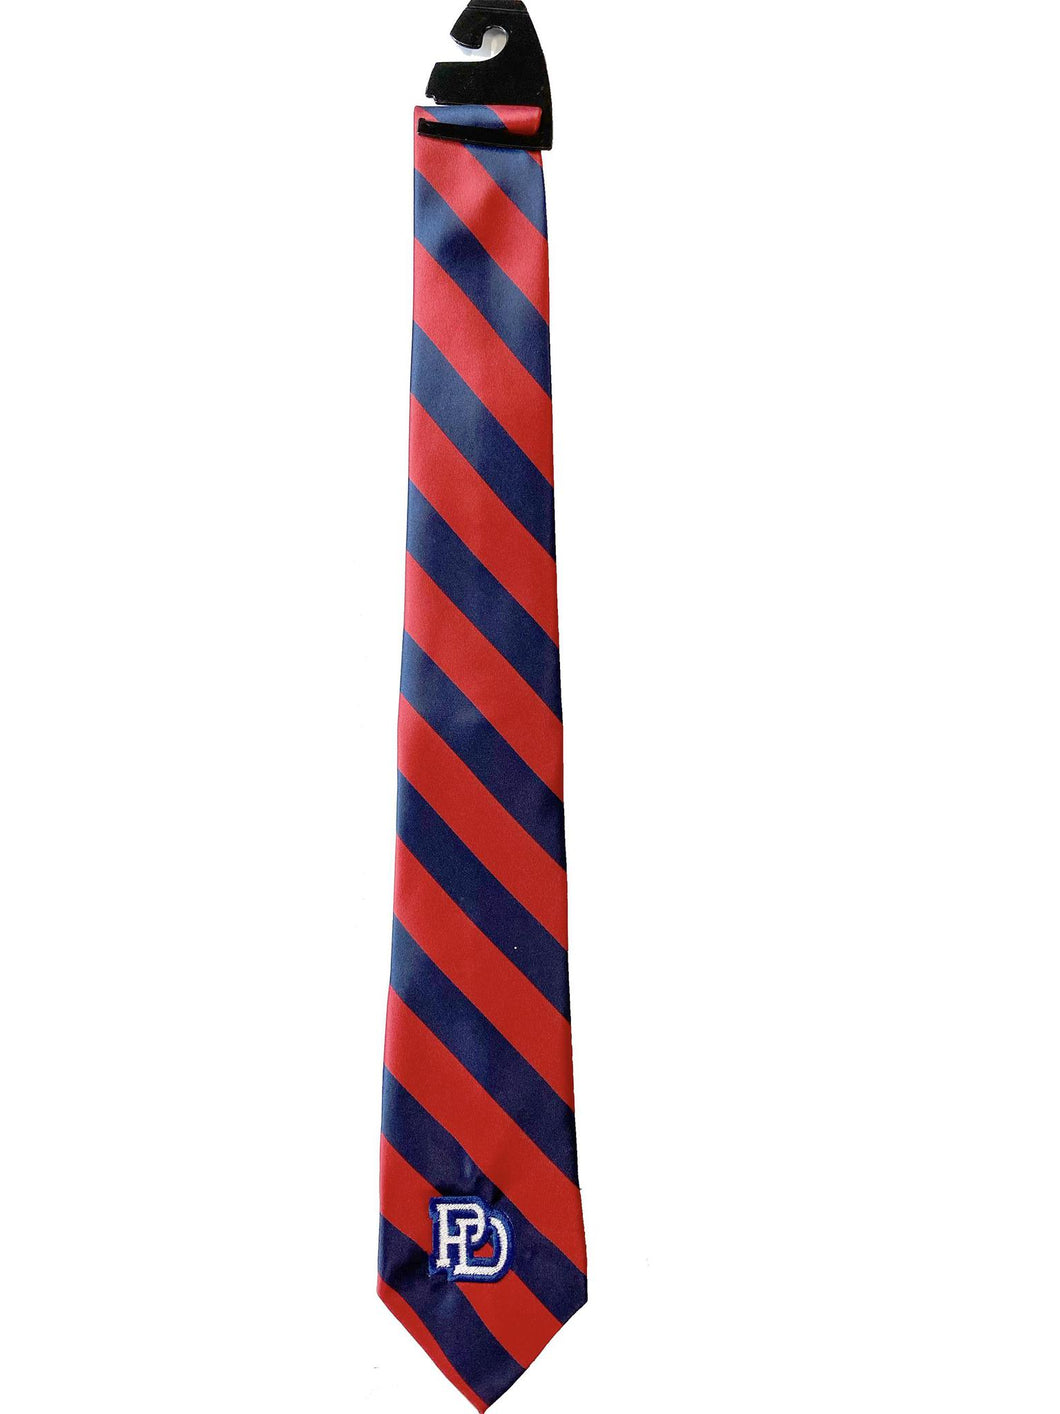 Youth Striped Tie